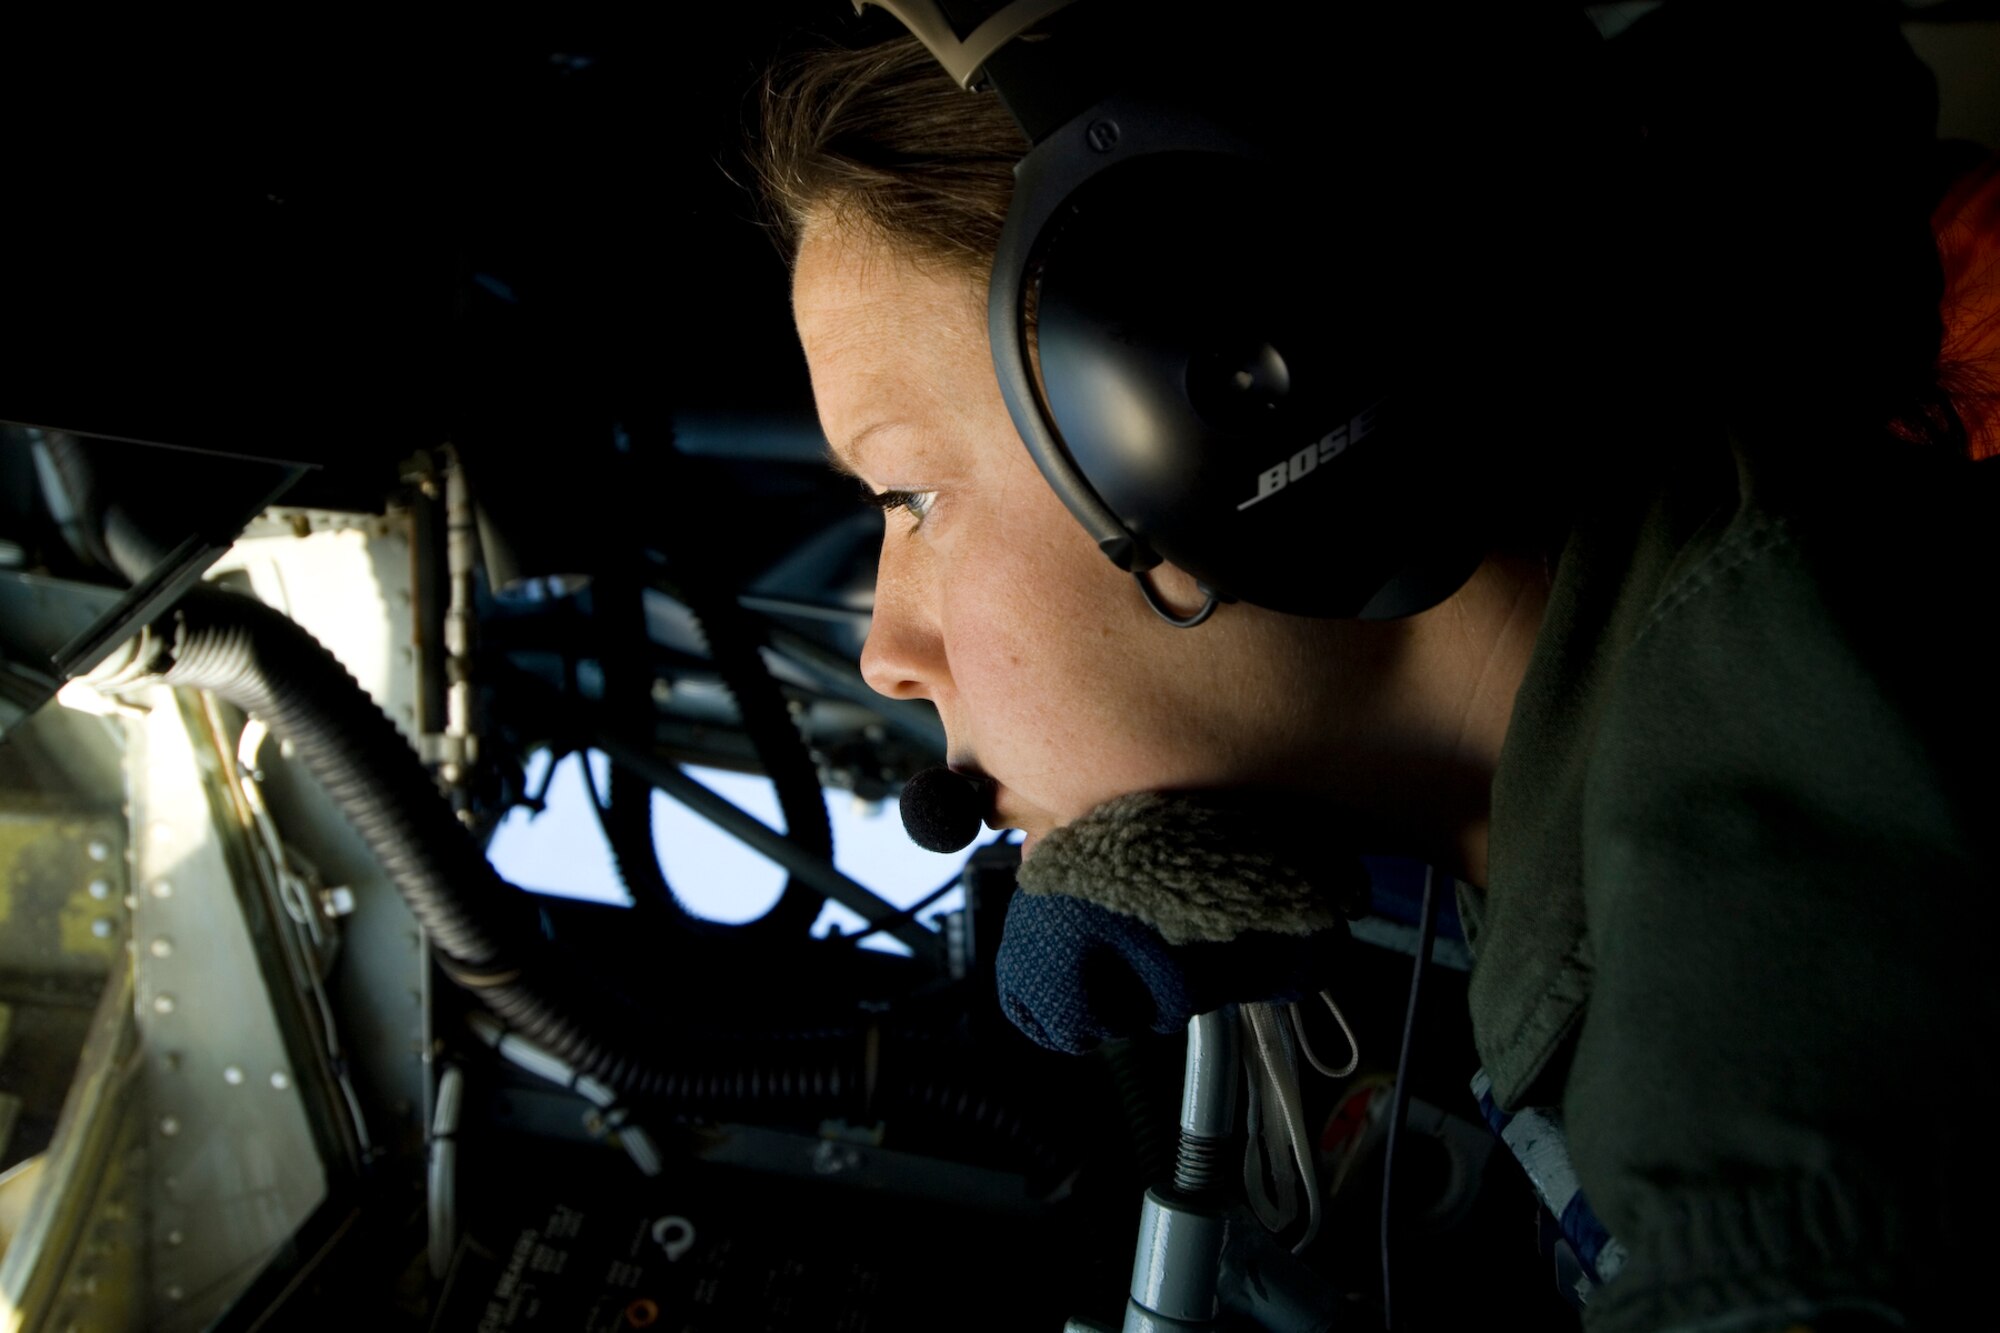 Senior Airman Misty Bice, boom operator for the 171st Air Refueling Squadron, Selfridge ANGB, Mich., refuels a 1st Fighter Wing F-22 Raptor flying out of Langley AFB, Va. This historic occasion marked the first time for many 127th Wing airmen to see the newest fighter in the Air Force fleet. (U.S. Air Force Photo by Senior Airman Jeremy L. Brownfield) (Released)